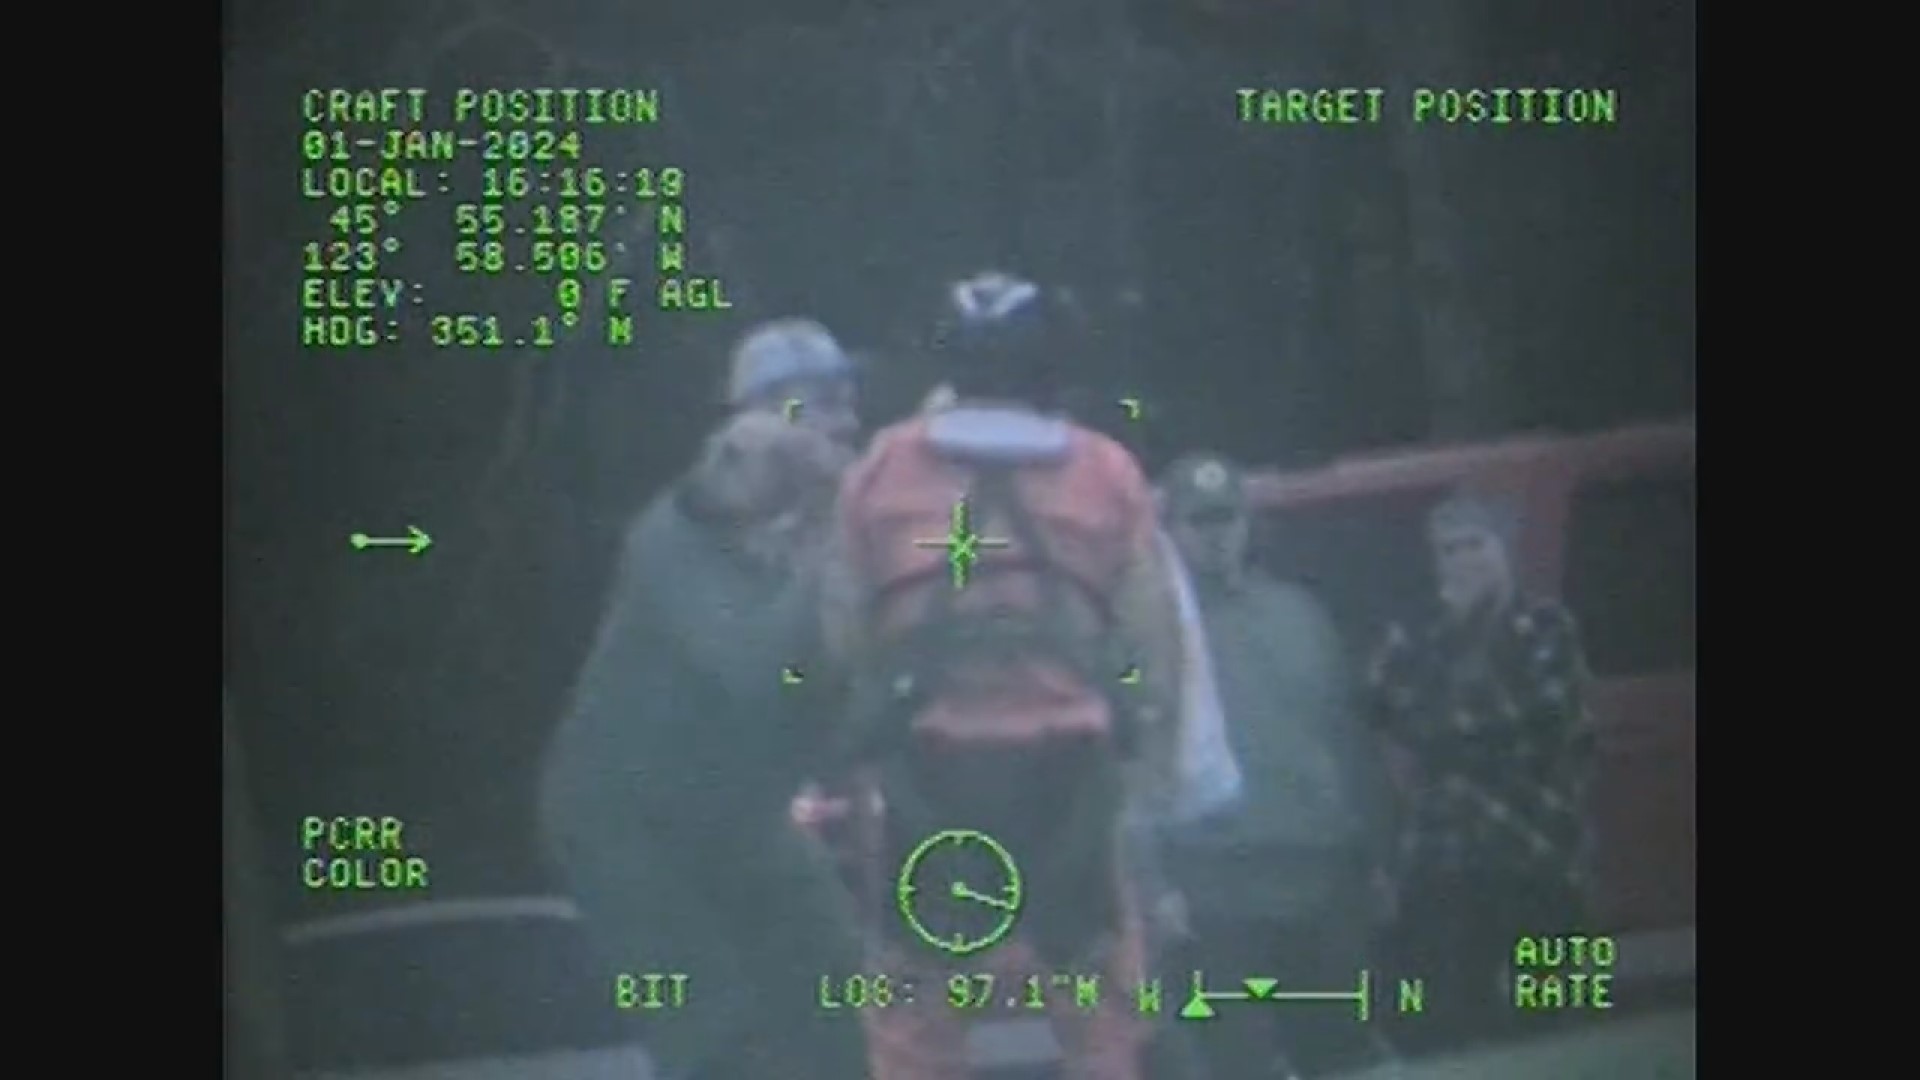 Video shows a U.S. Coast Guard Aircrew rescue a dog that had fallen off a cliff in Ecola State Park on Jan. 1. The dog is expected to recover.